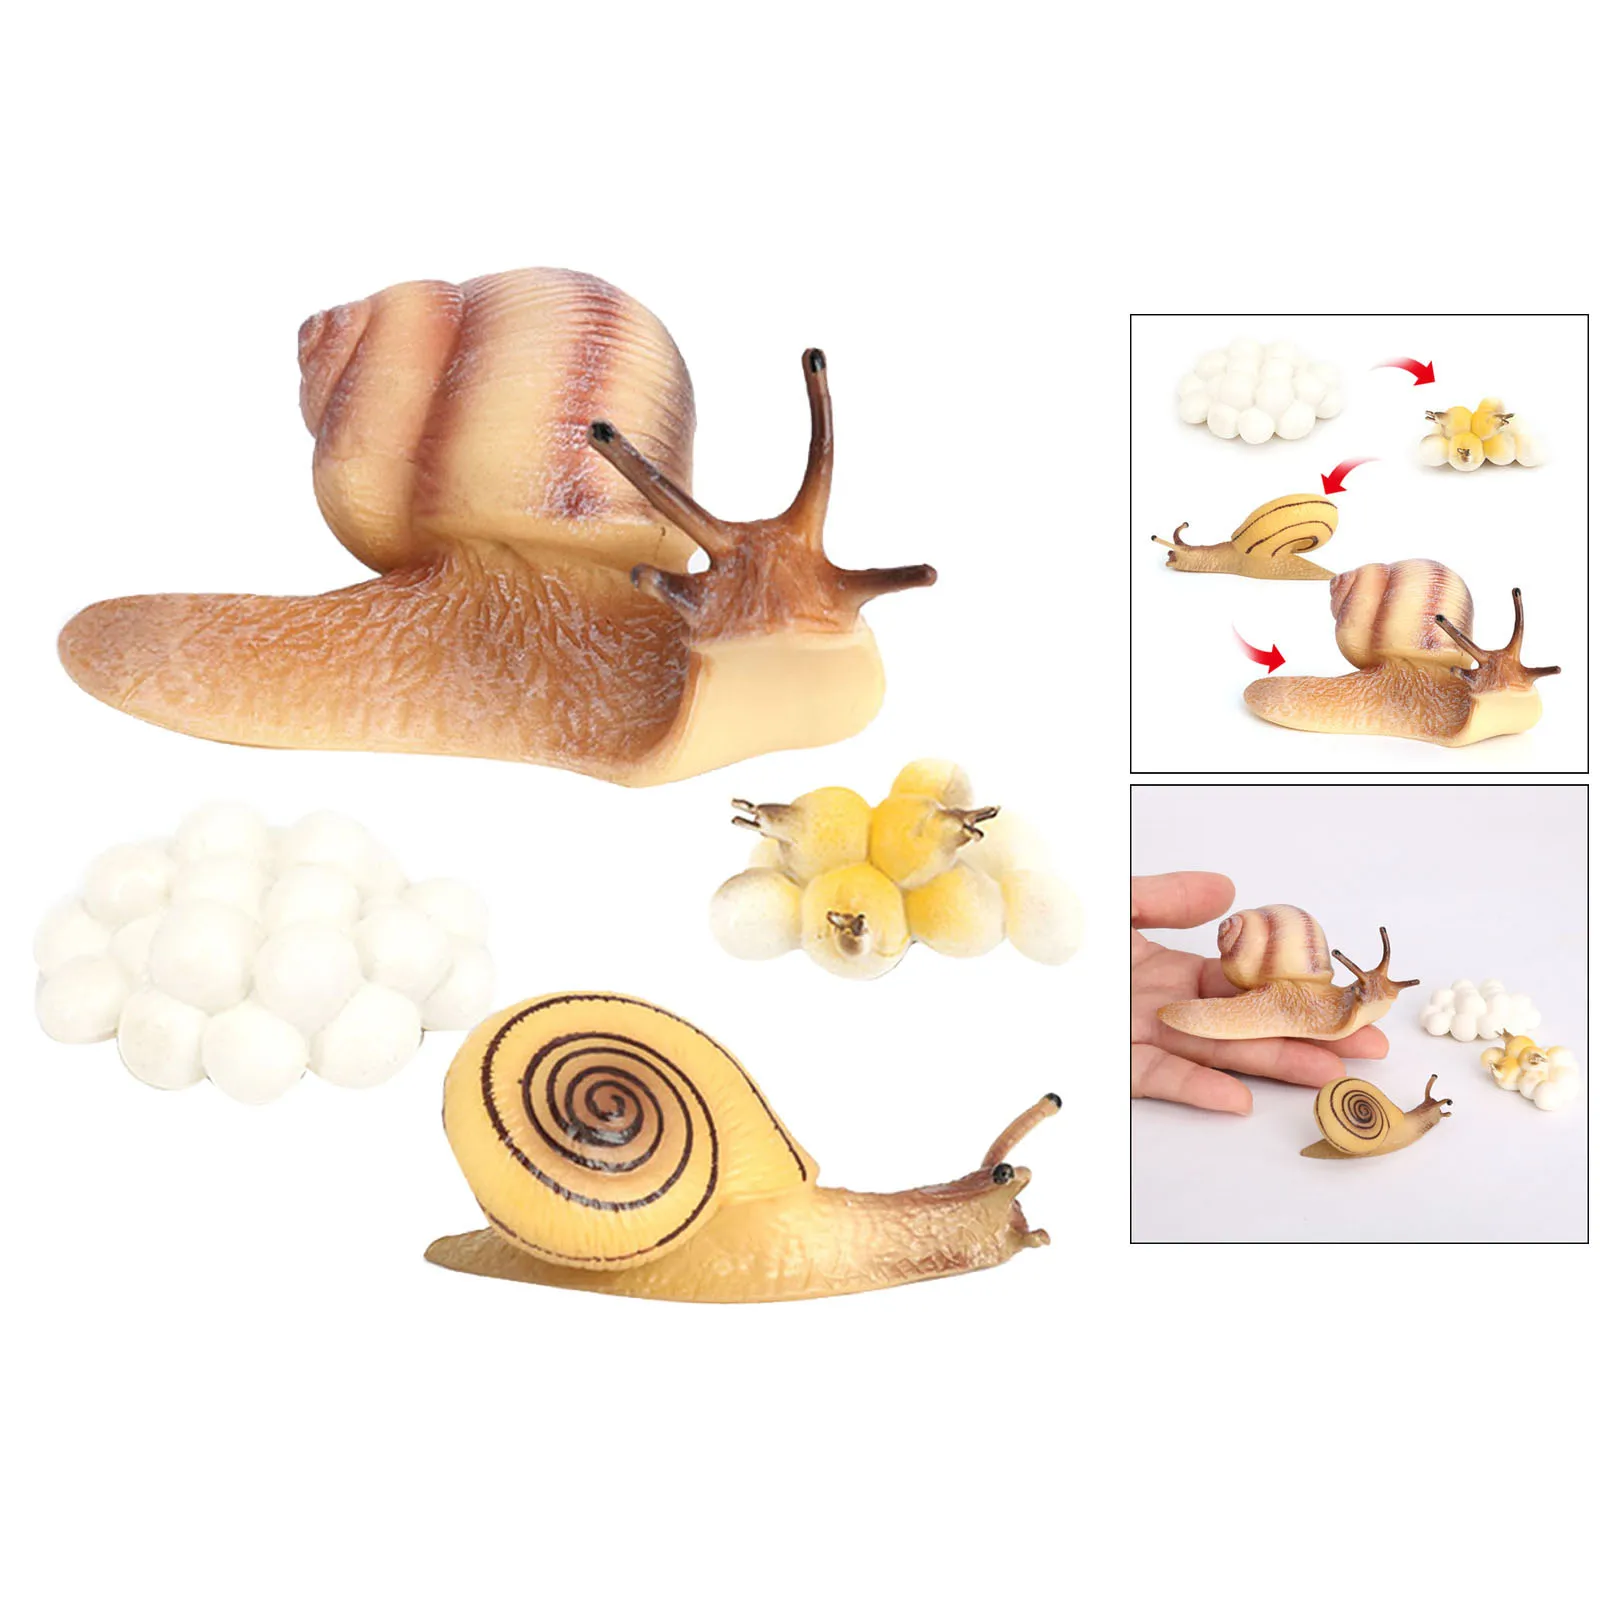 Realistic Growth Cycle Toys Nature Life Cycle Animal Snail Model